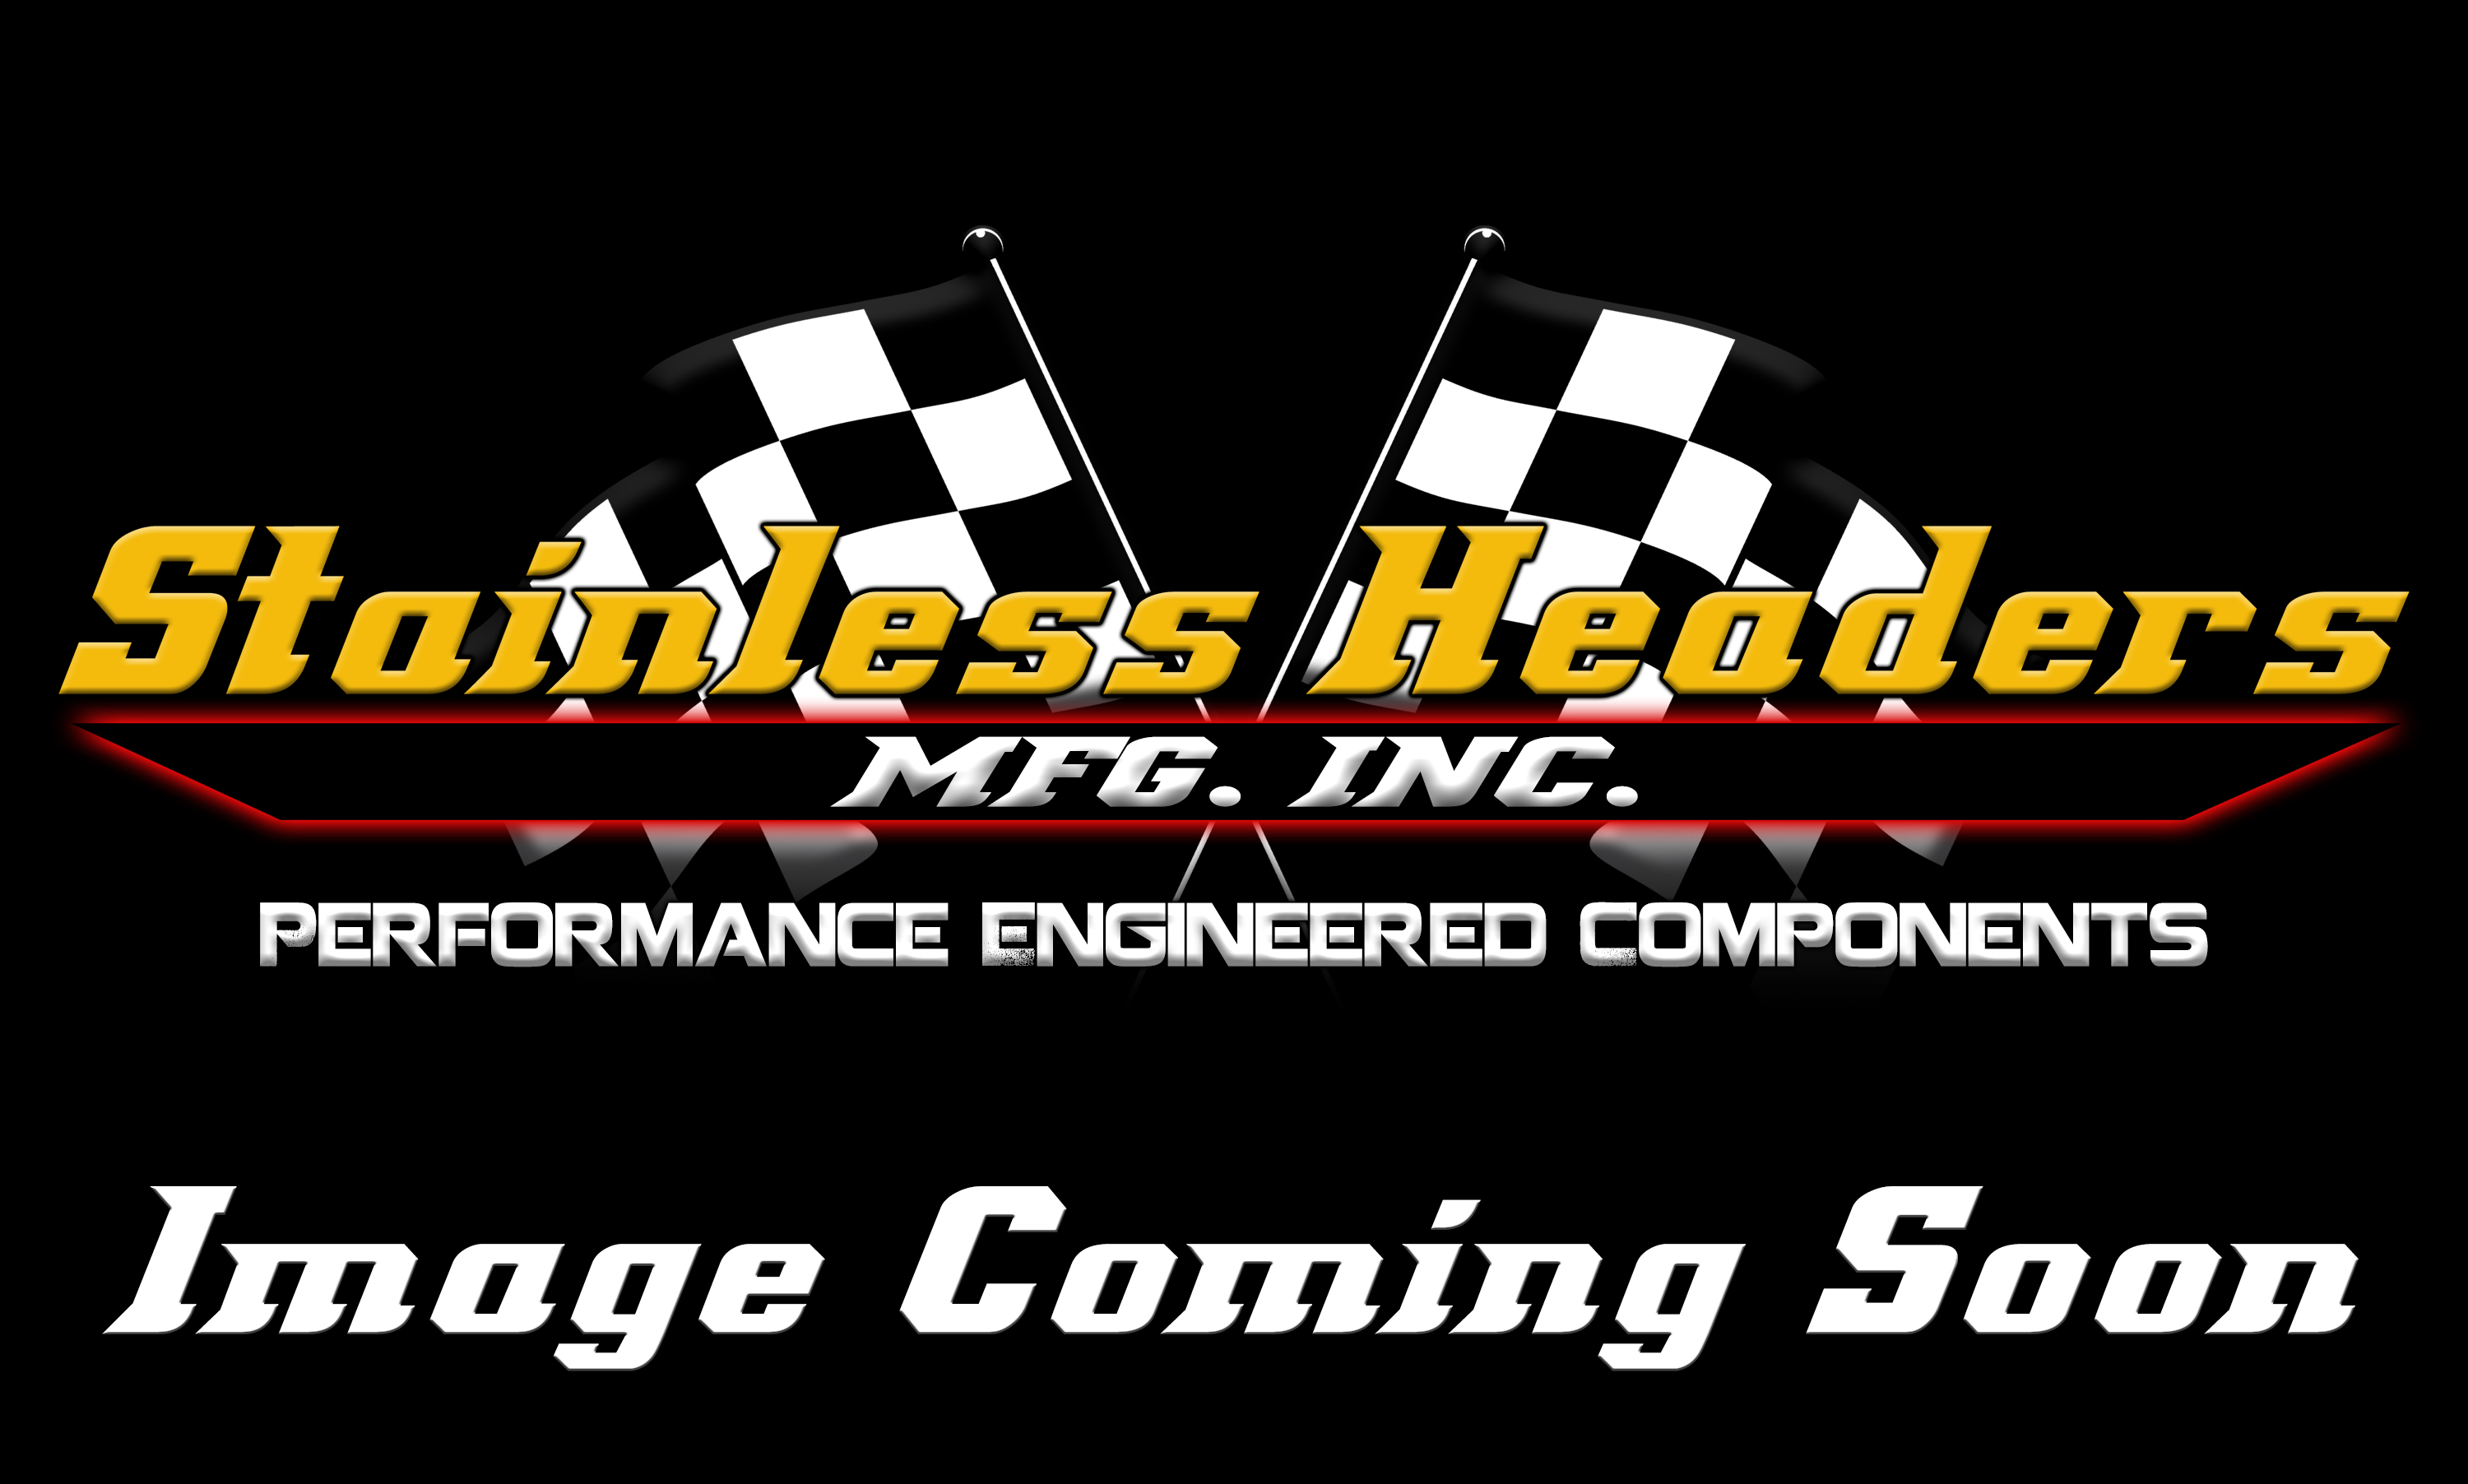 Custom Header Components - Merge Collectors - Stainless Headers - 1 3/4" Primary 8 into 1 Performance Merge Collector-16ga 304ss